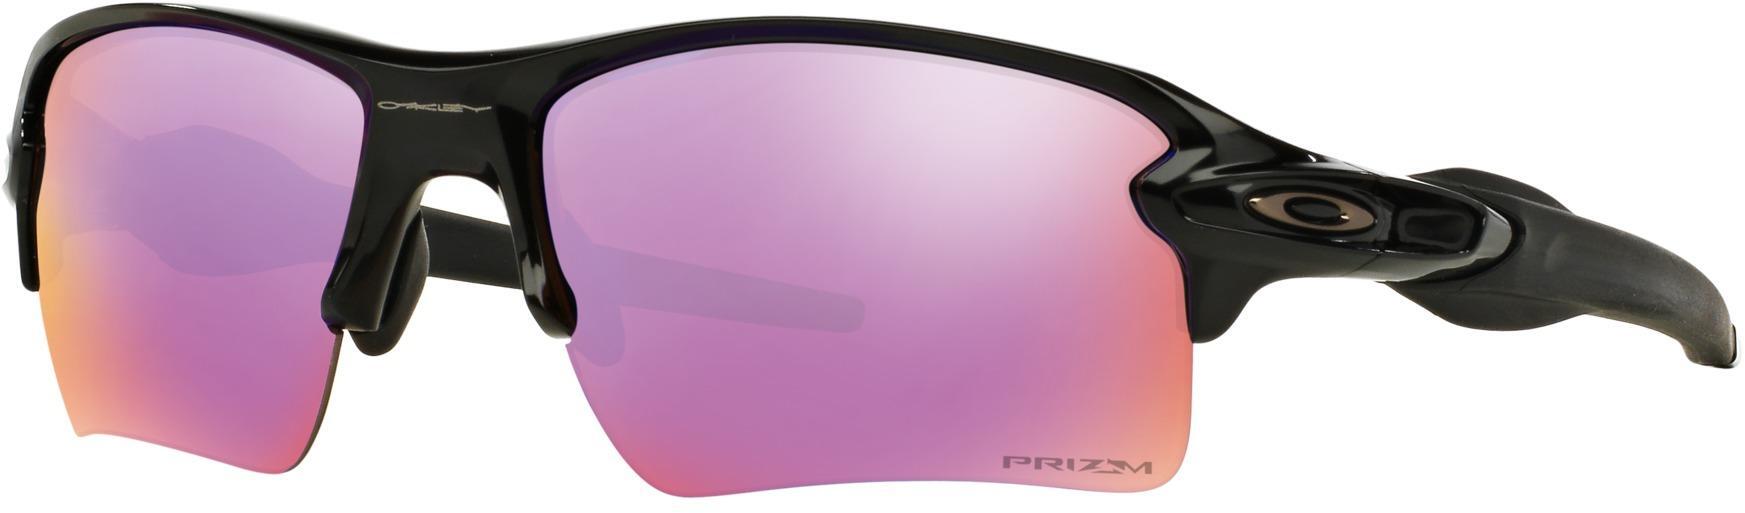 are oakley flak 2.0 z87 approved